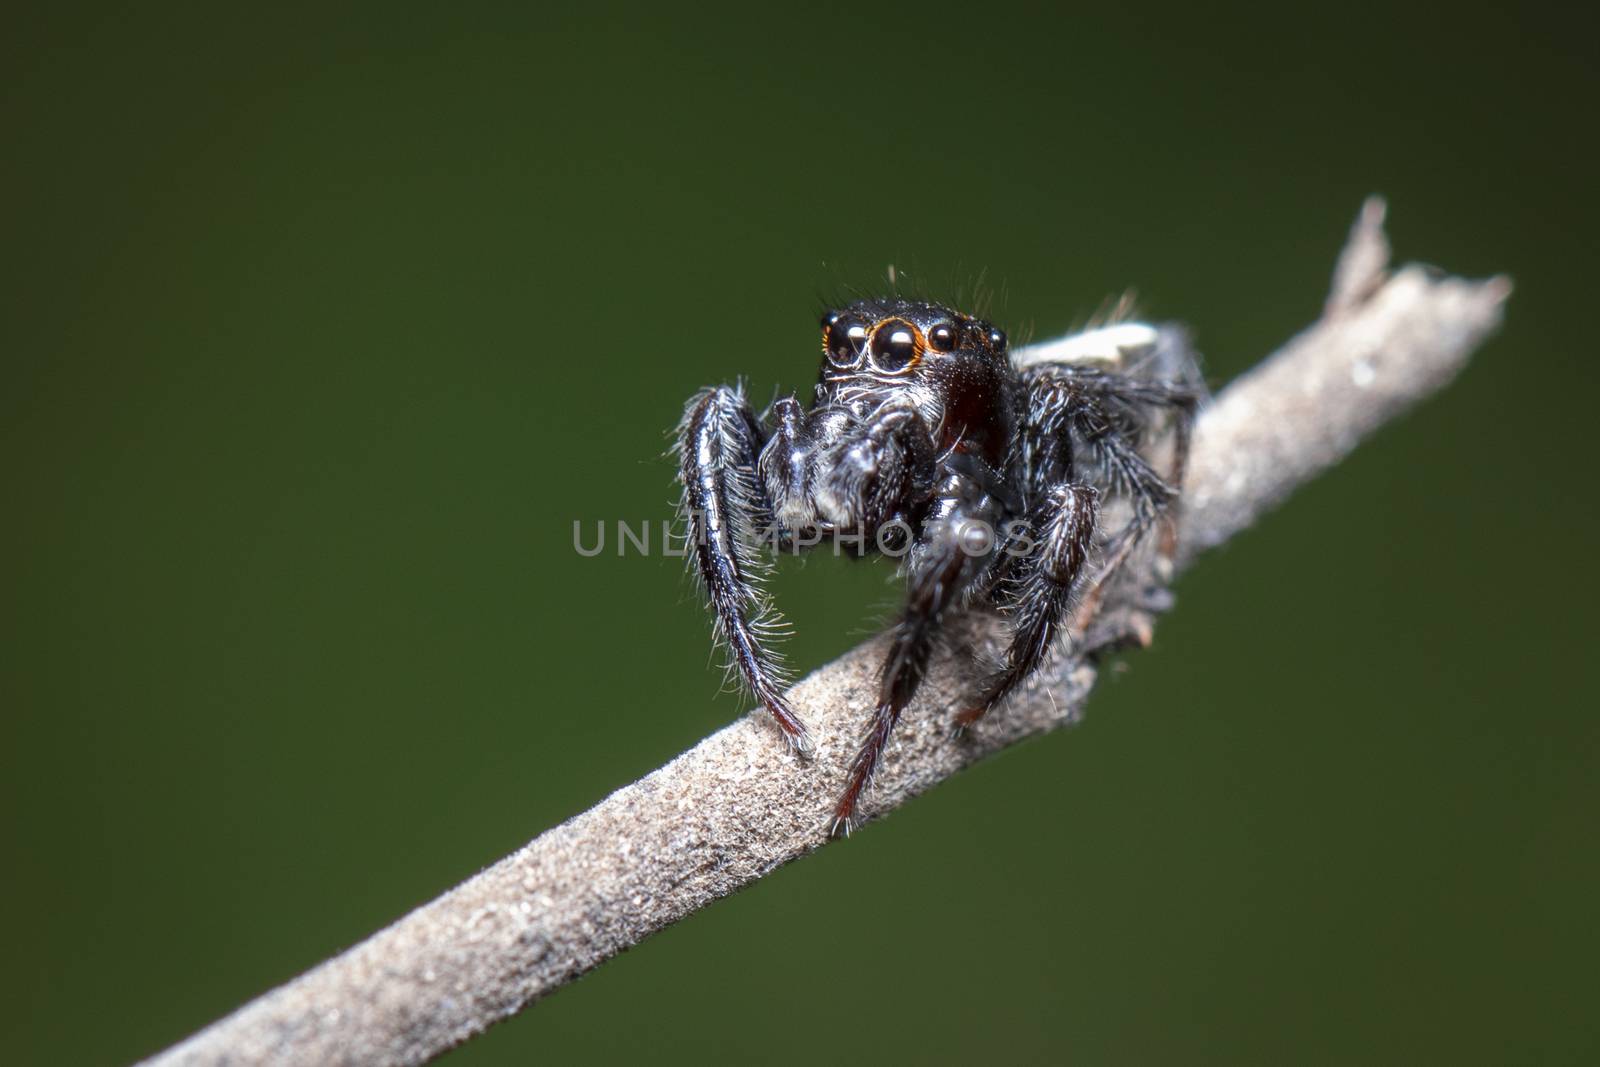 Image of jumping spiders (Salticidae) on a branch on a natural b by yod67